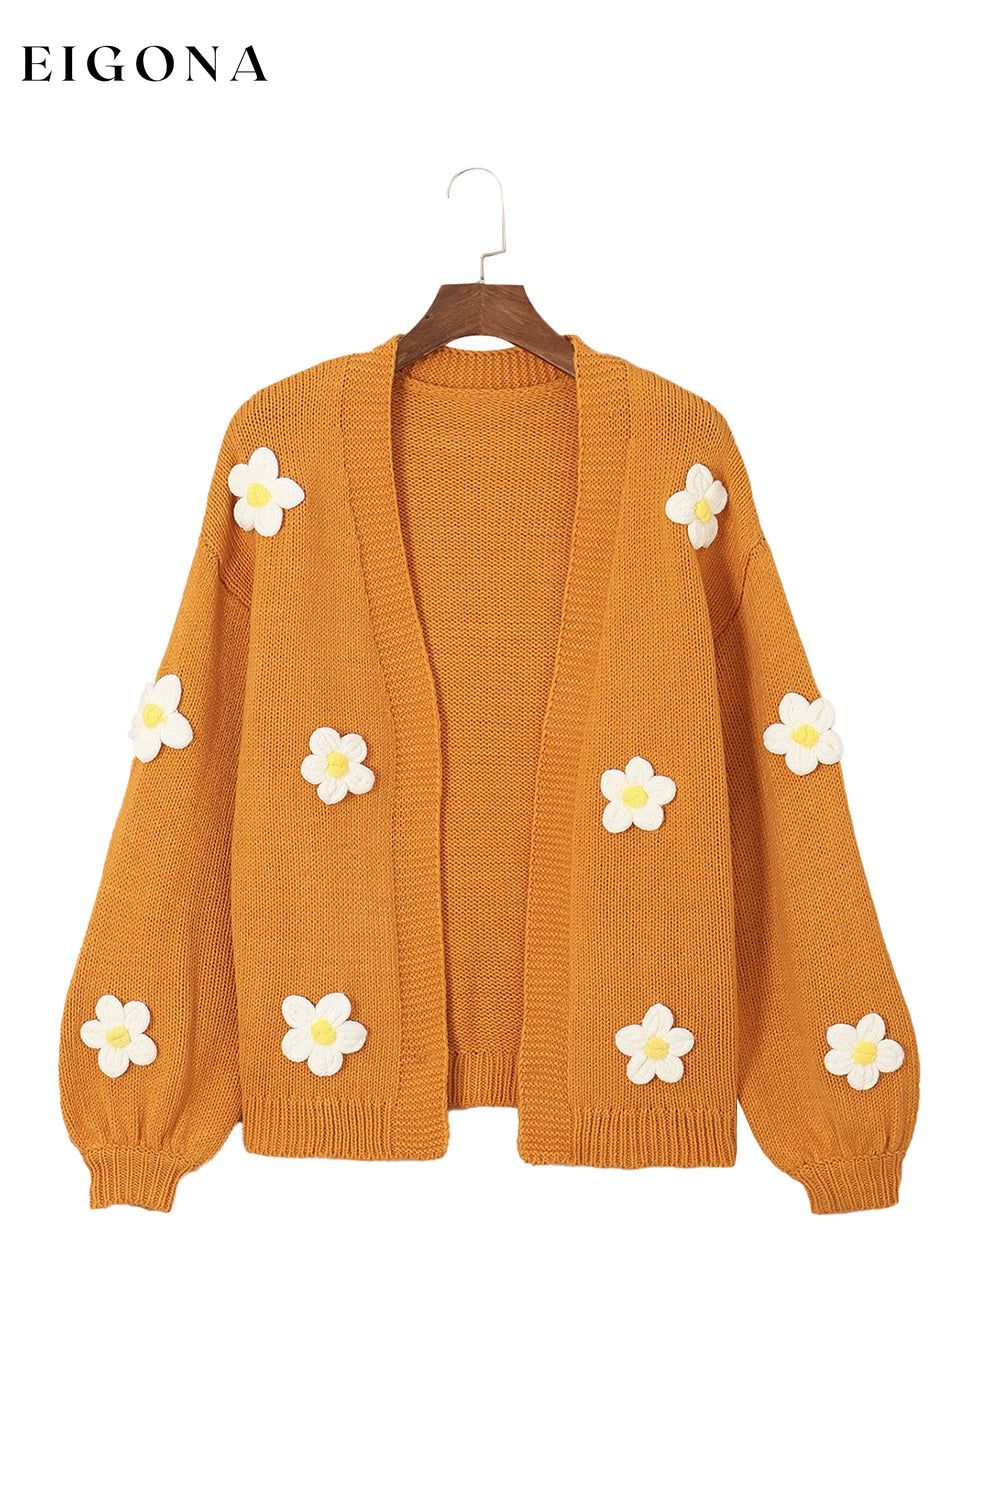 Light French Beige Flower Applique Bubble Sleeve Cardigan cardigan cardigans clothes Color Orange Craft Embroidery Occasion Daily Print Floral Print Vintage Floral Season Winter Style Southern Belle Sweater sweaters